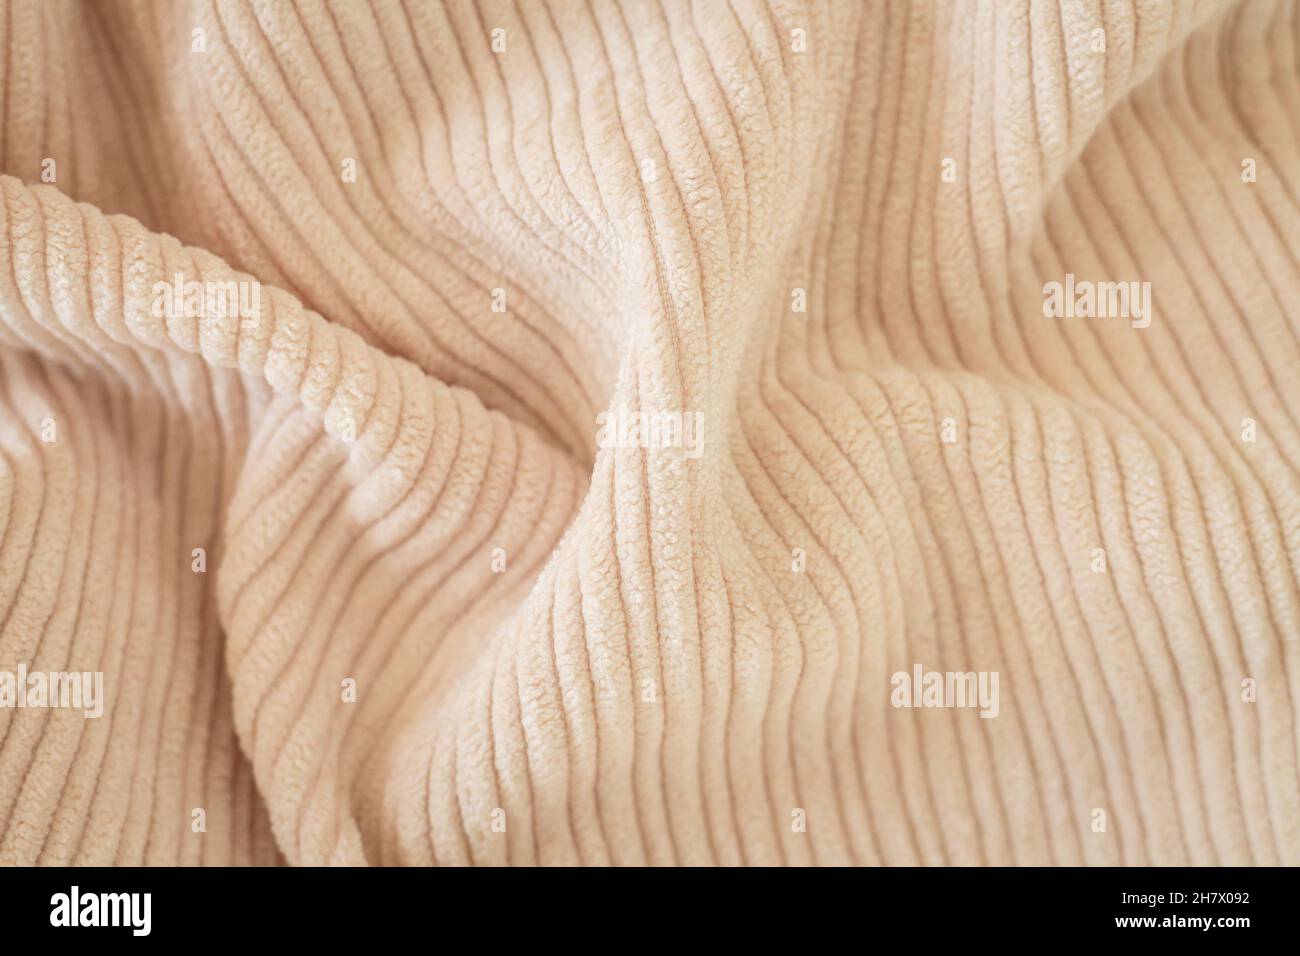 Ribbed beige corduroy or velvet texture background top view Stock Photo